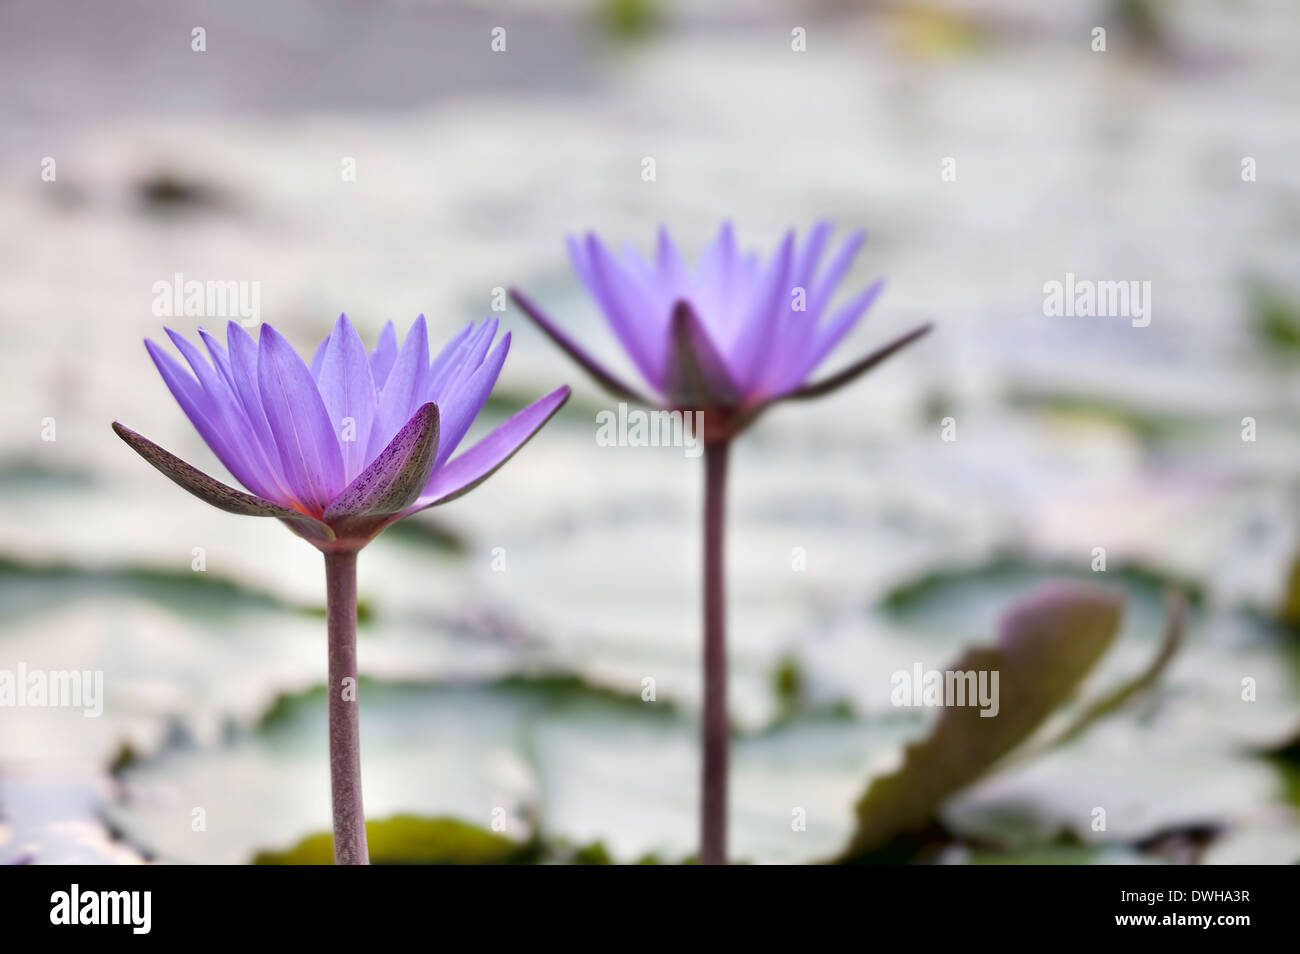 Pond with Purple Water Lily Flower in Bloom Closeup Stock Photo